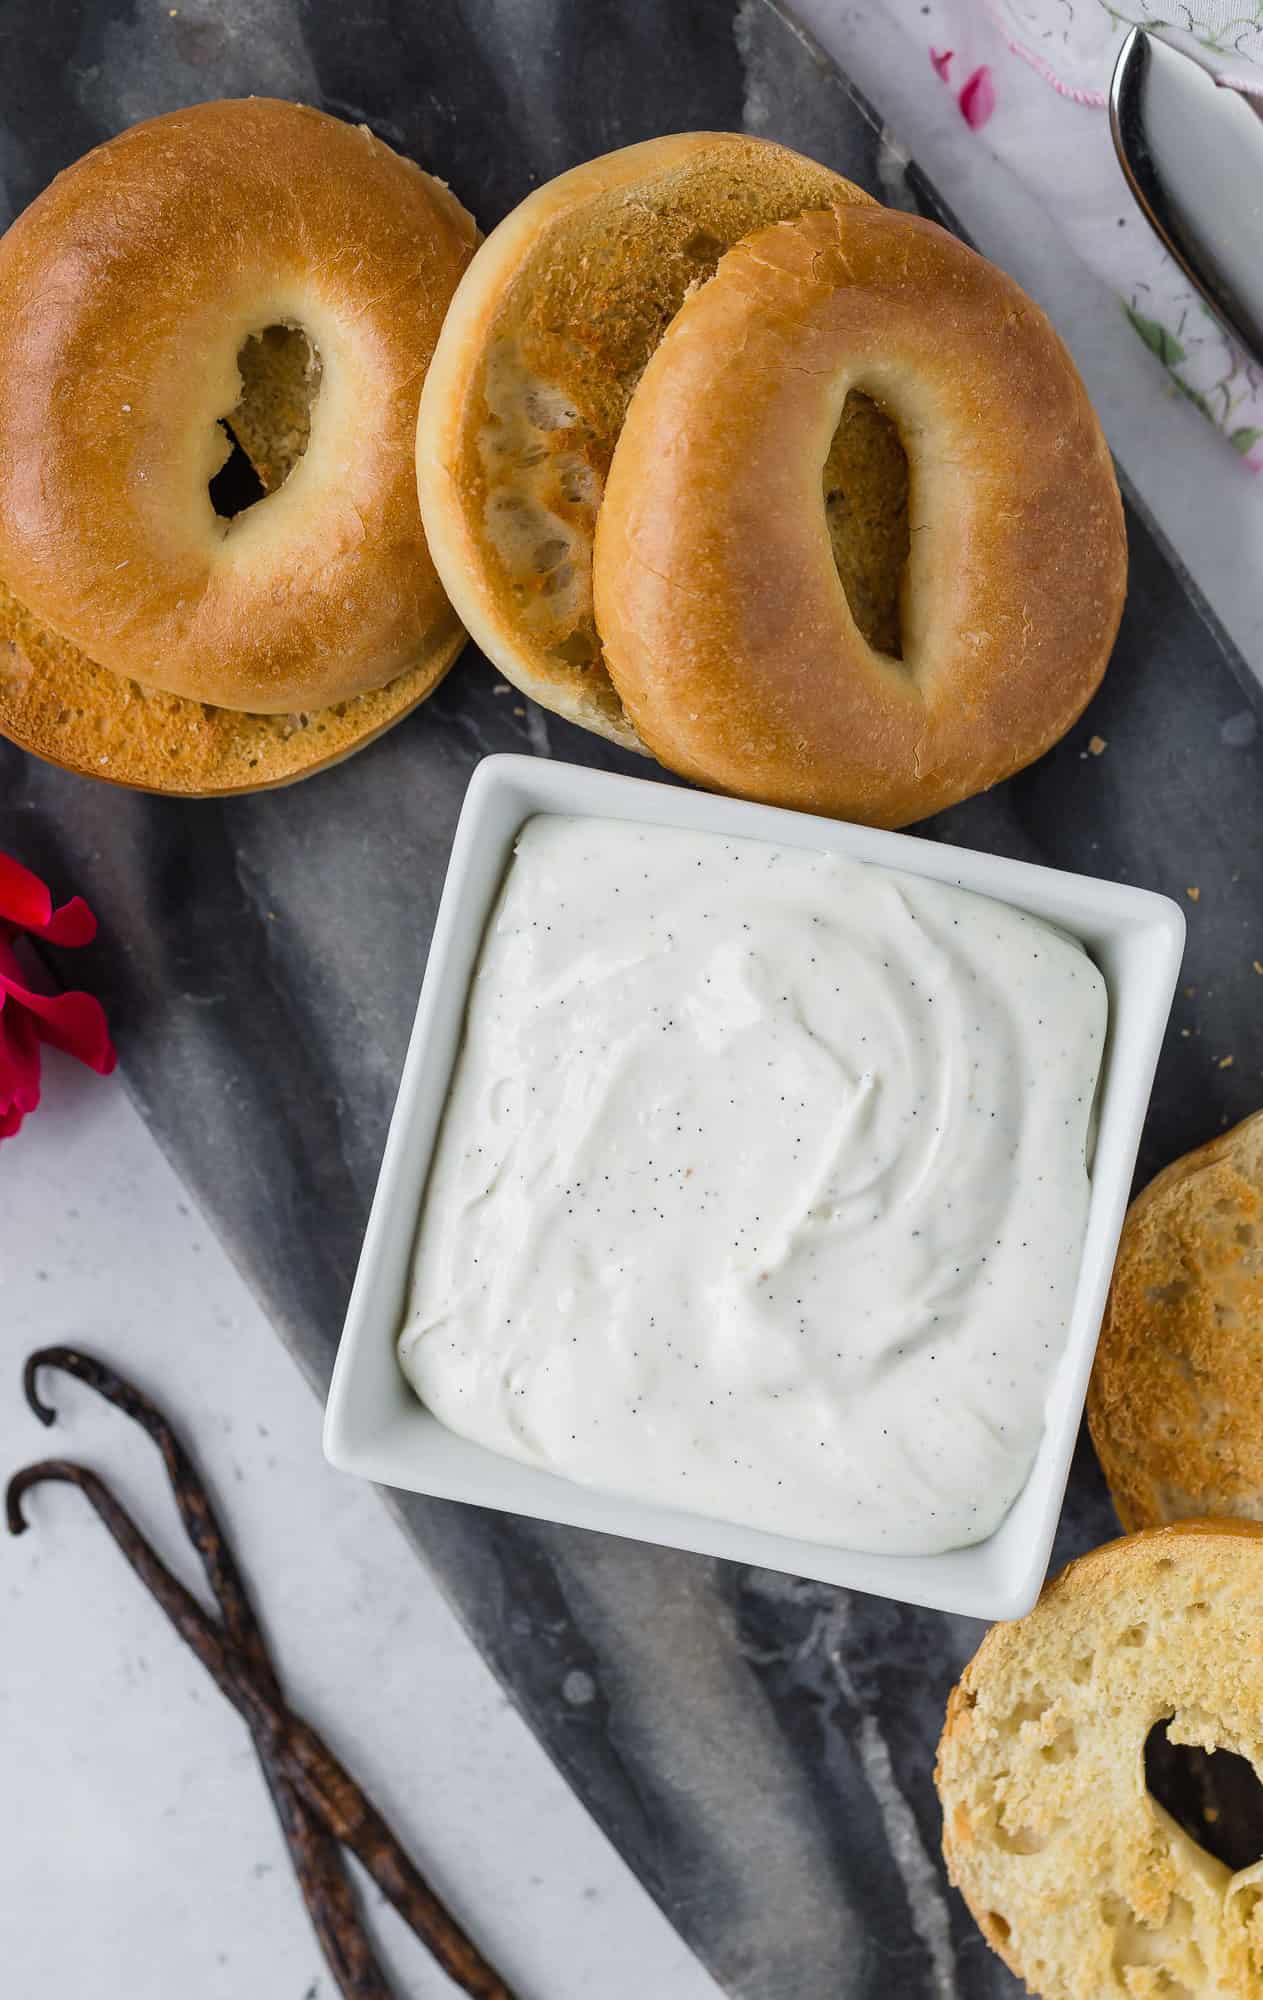 Cream cheese with vanilla beans, surrounded by bagels.